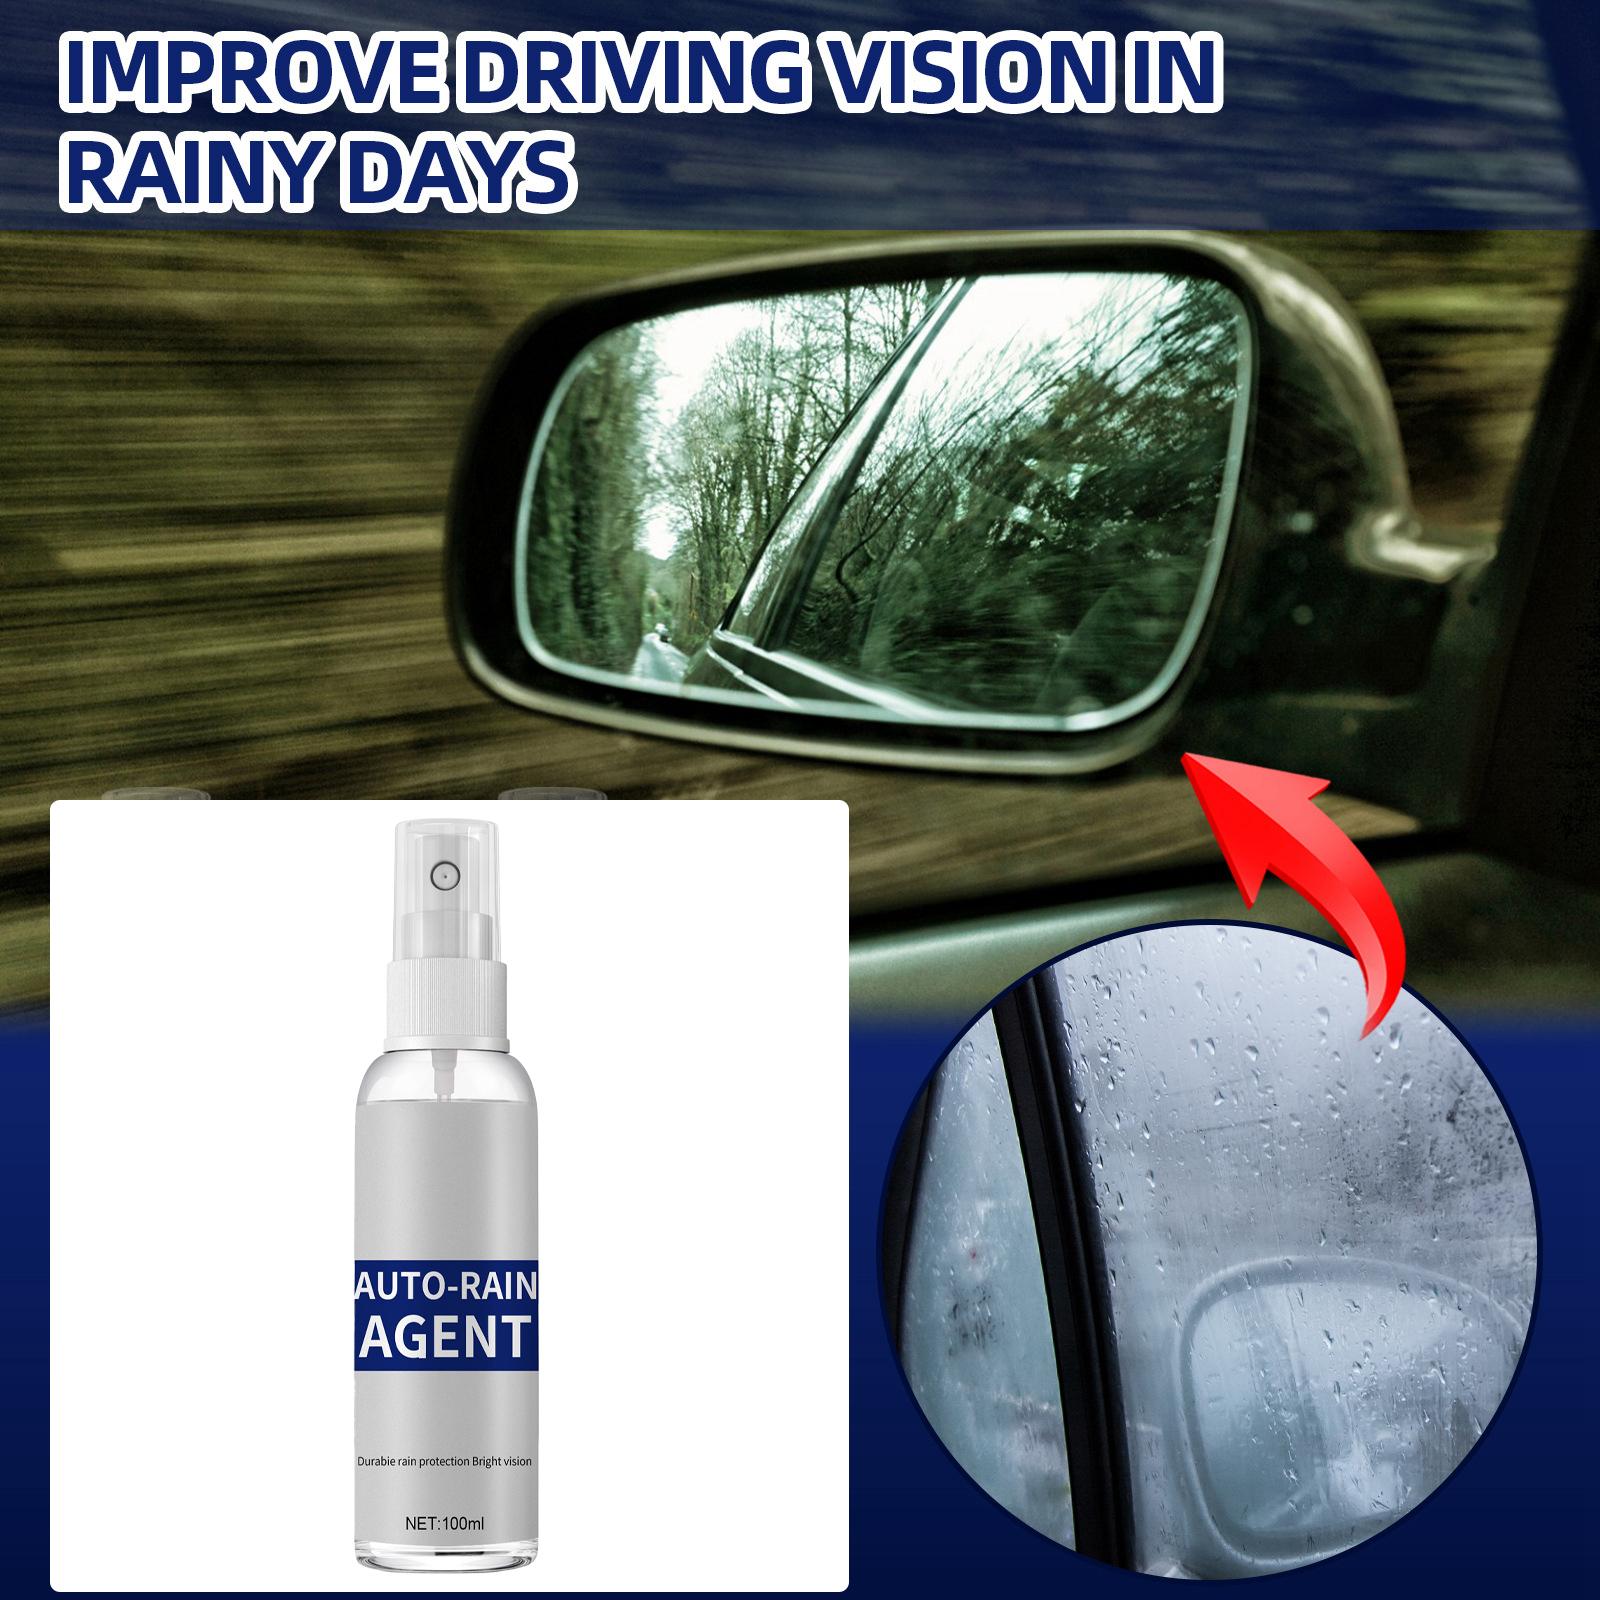 Rain Repellent Increased Visibility Glass Cleaner for Car Visor Goggles 100ml